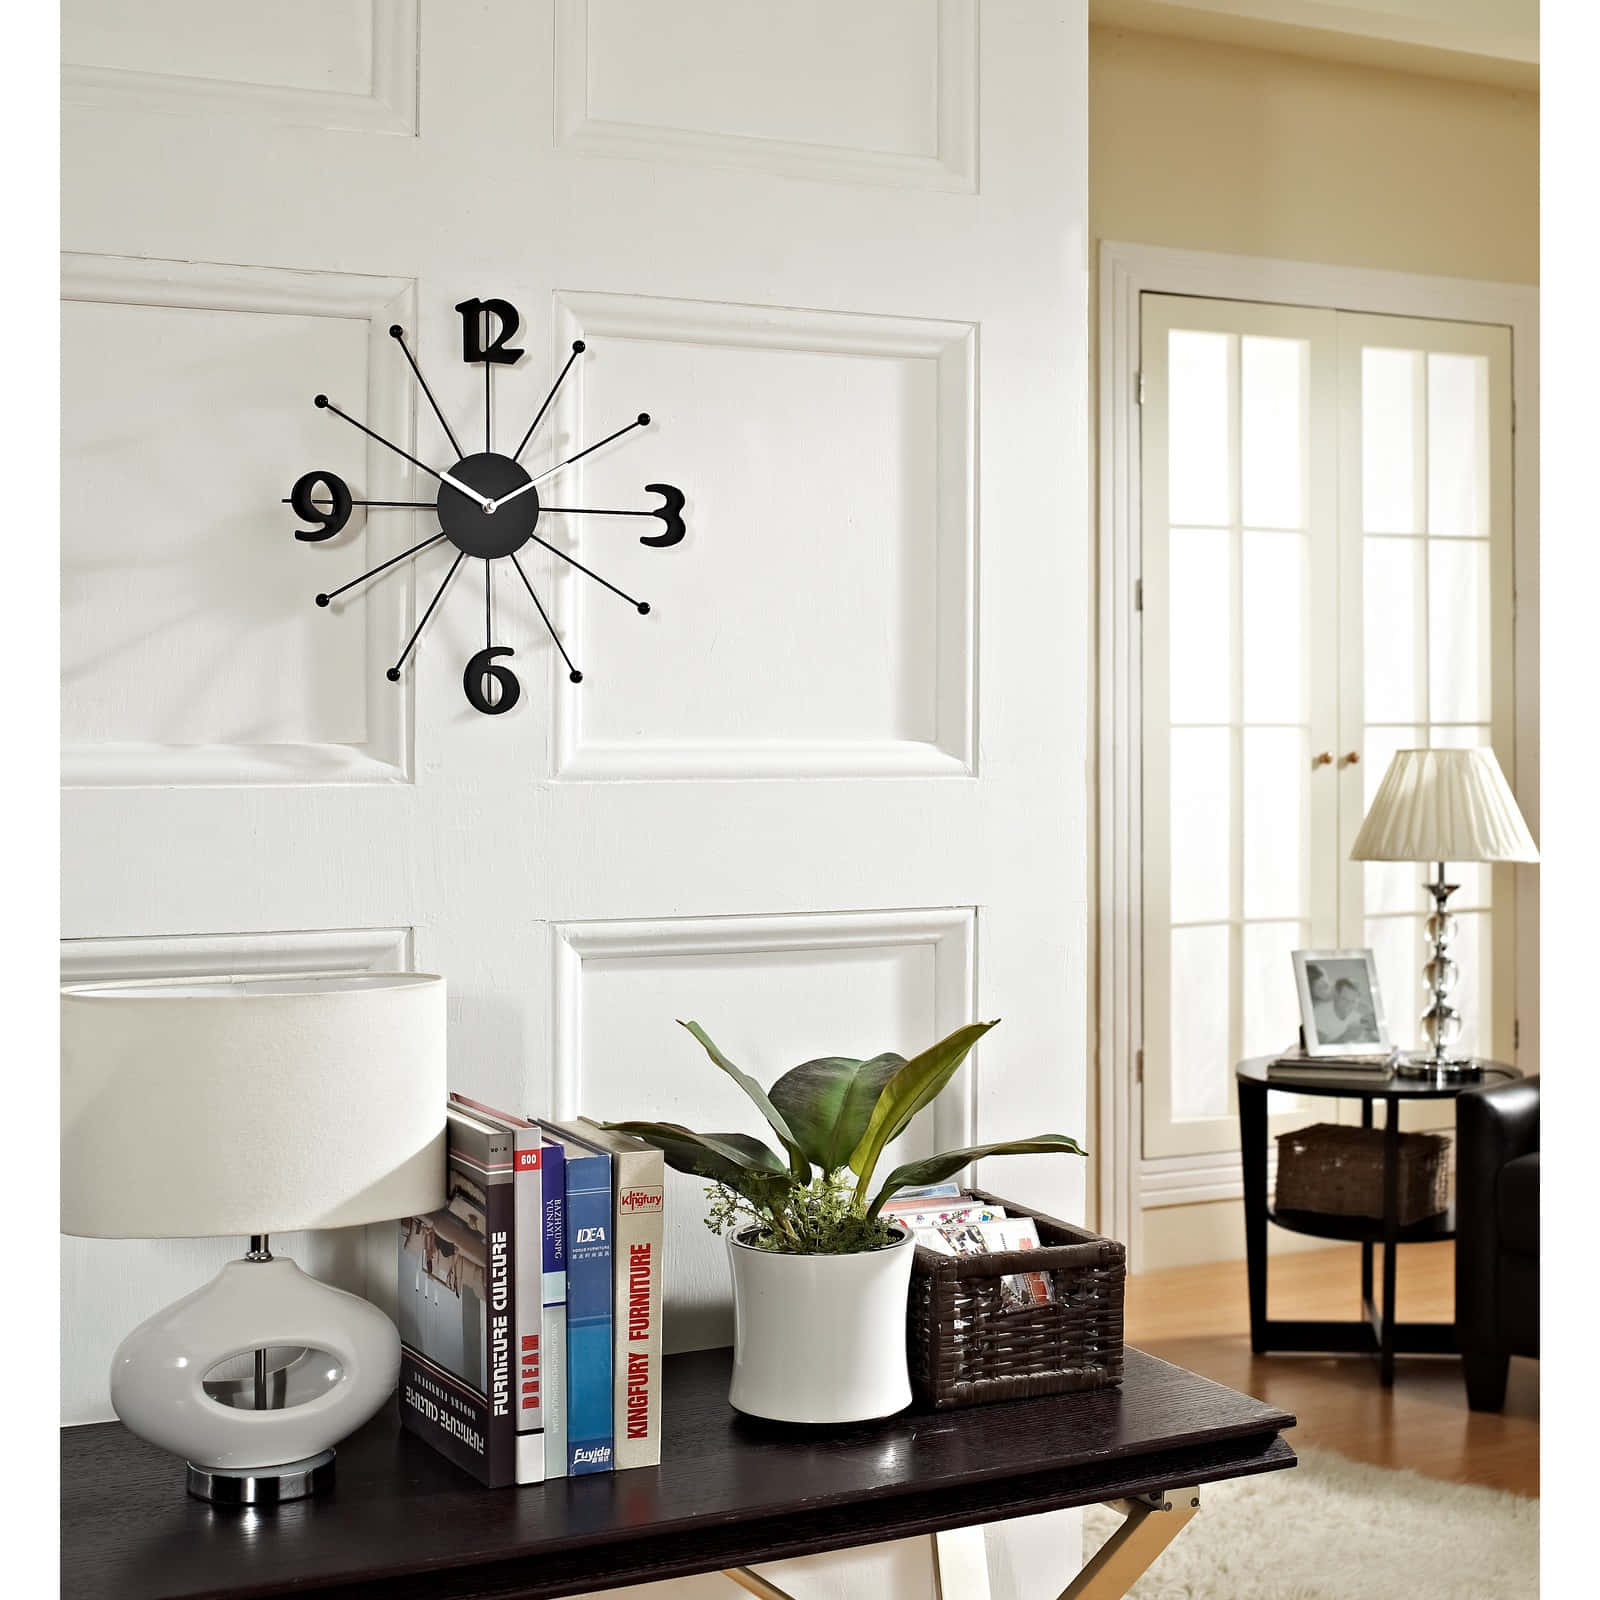 Keep track of time with a beautiful wall clock.